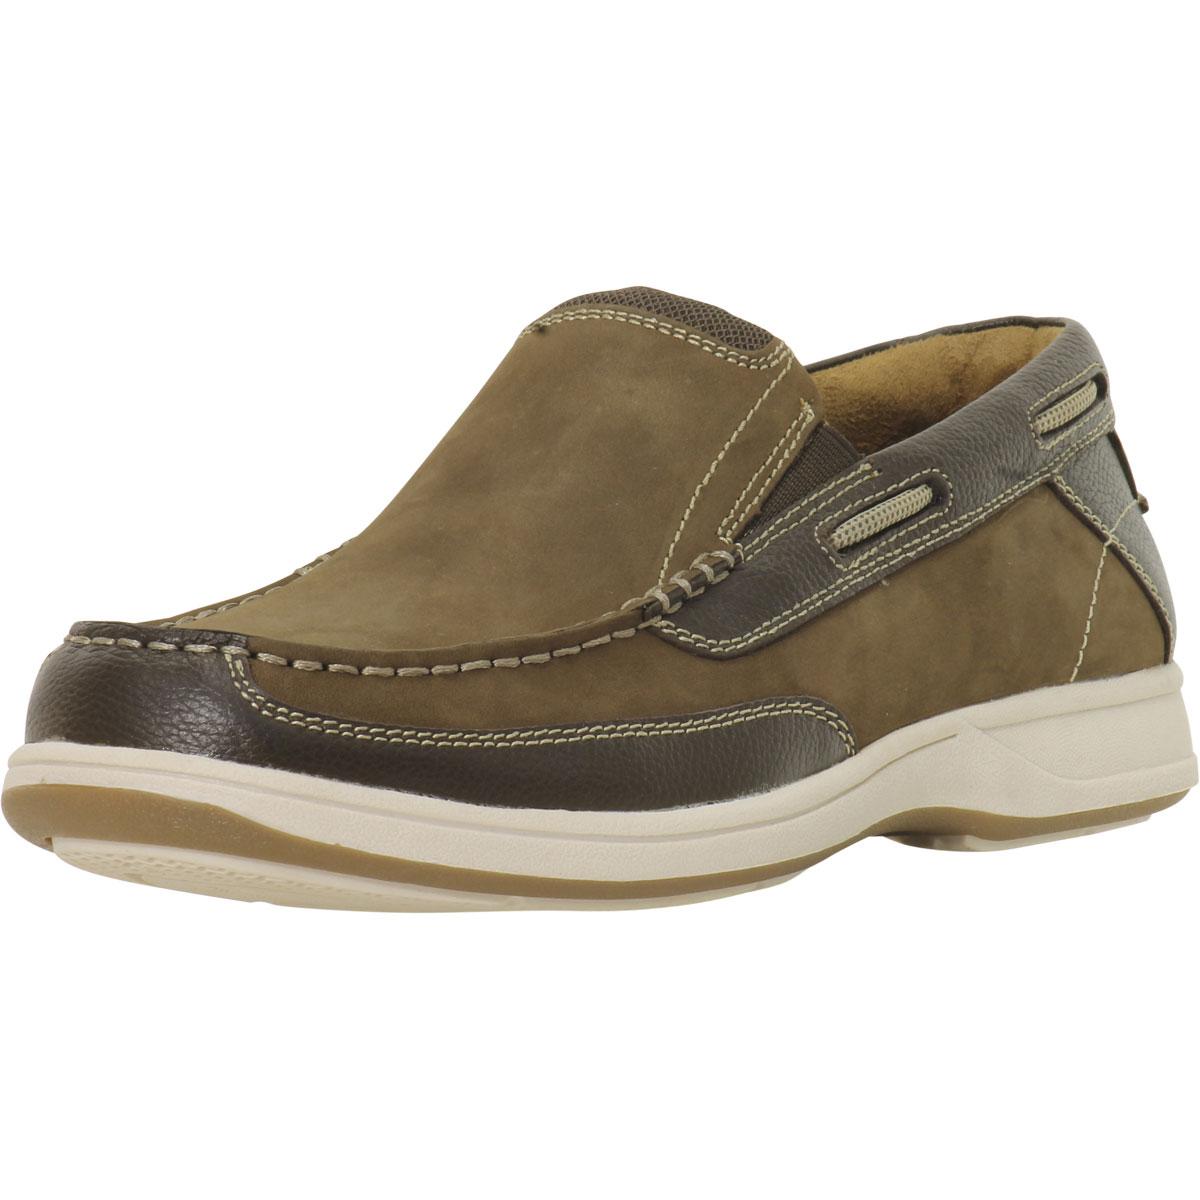 Lakeside Slip-On Loafers Boat Shoes